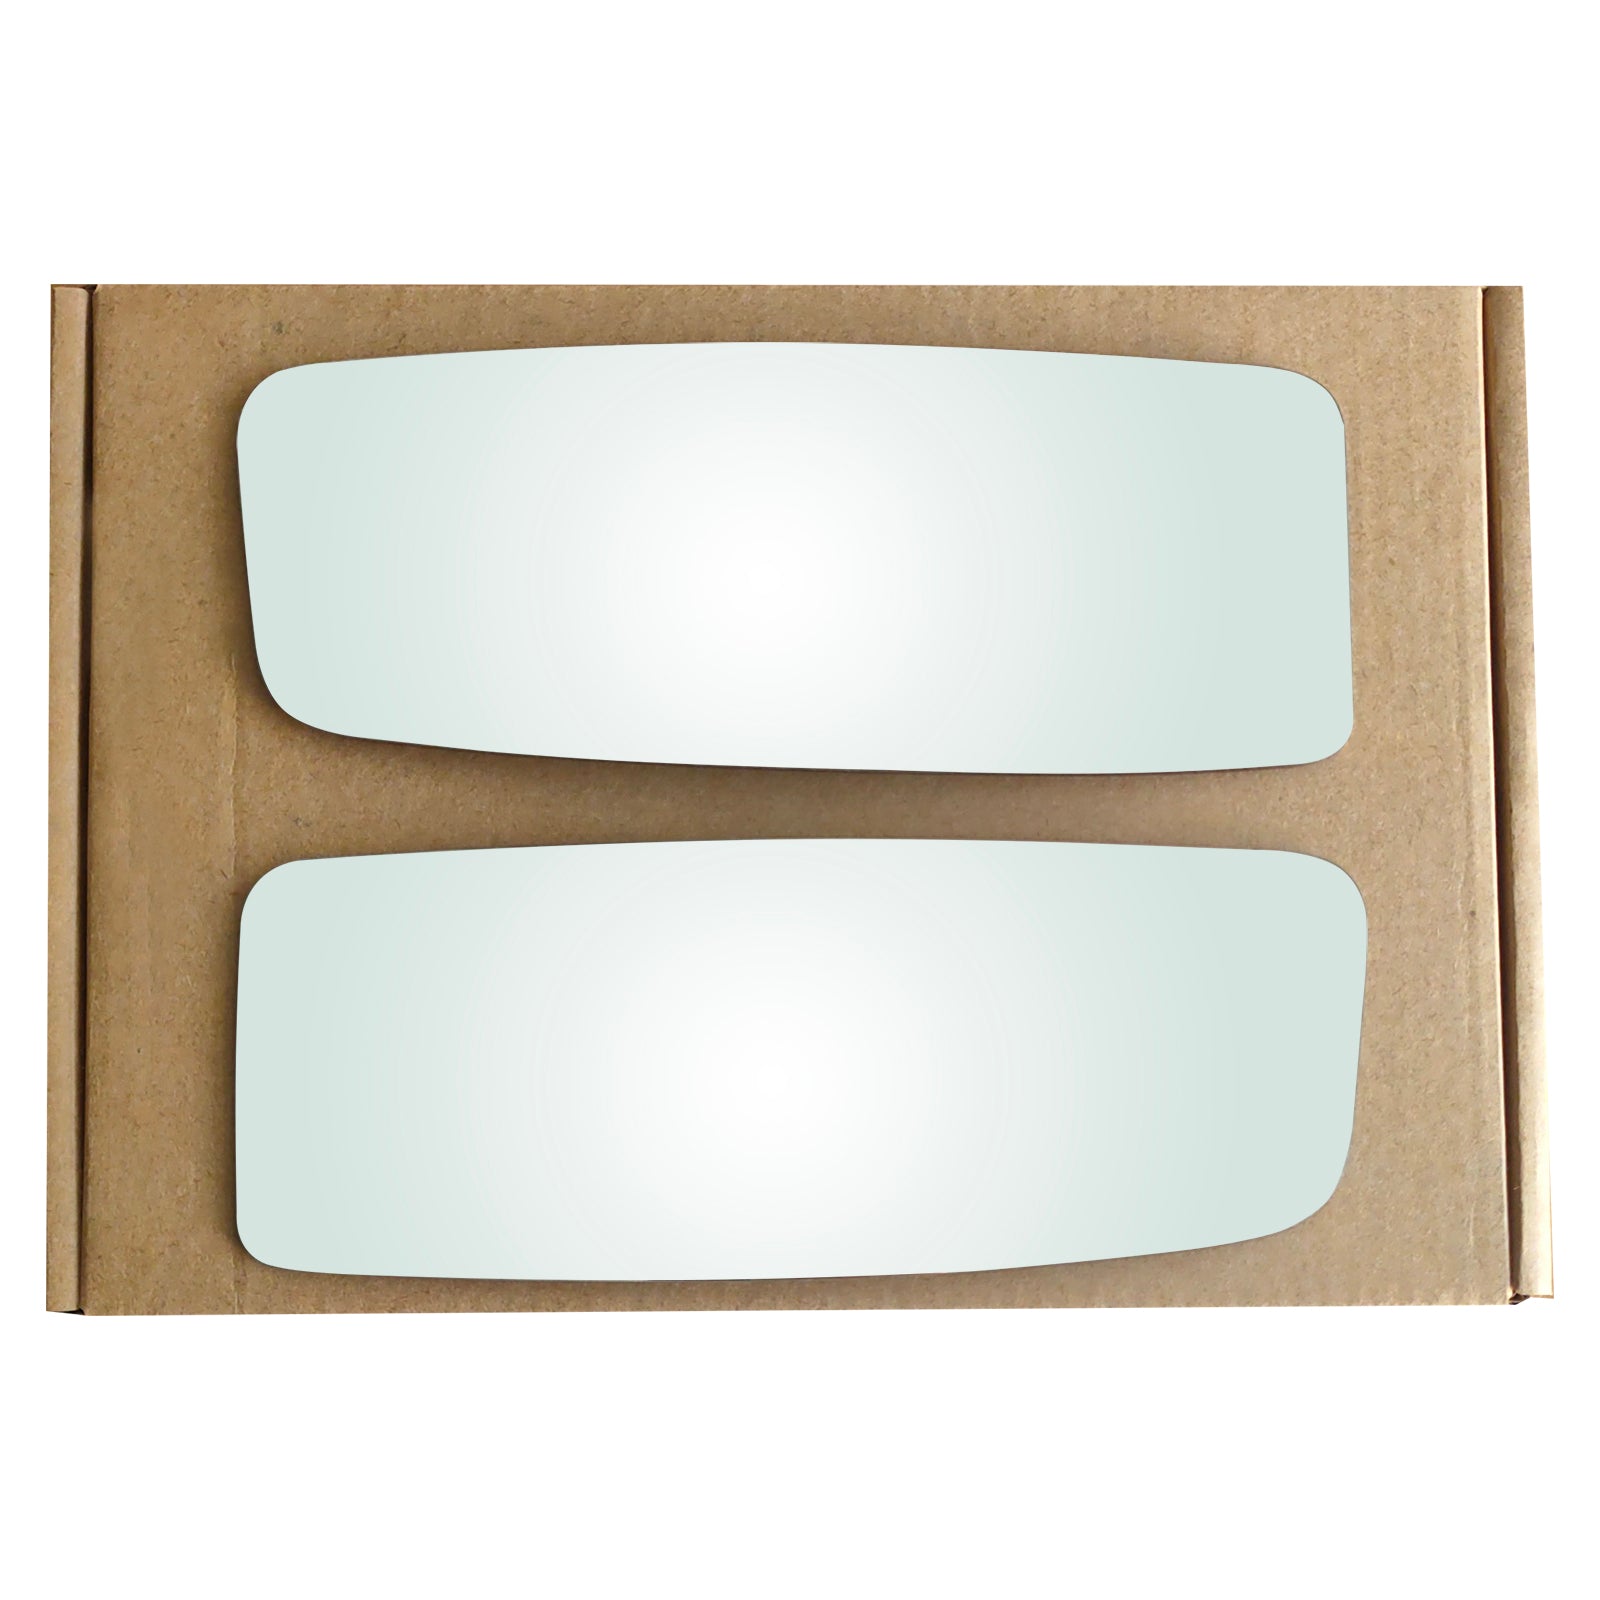 WLLW Replacement Lower Towing Mirror Glass for Dodge Sprinter / Freightliner Sprinter / Mercedes Benz Sprinter 1500 2500 3500, Driver Left LH/Passenger Right RH/The Both Sides Convex M-0055